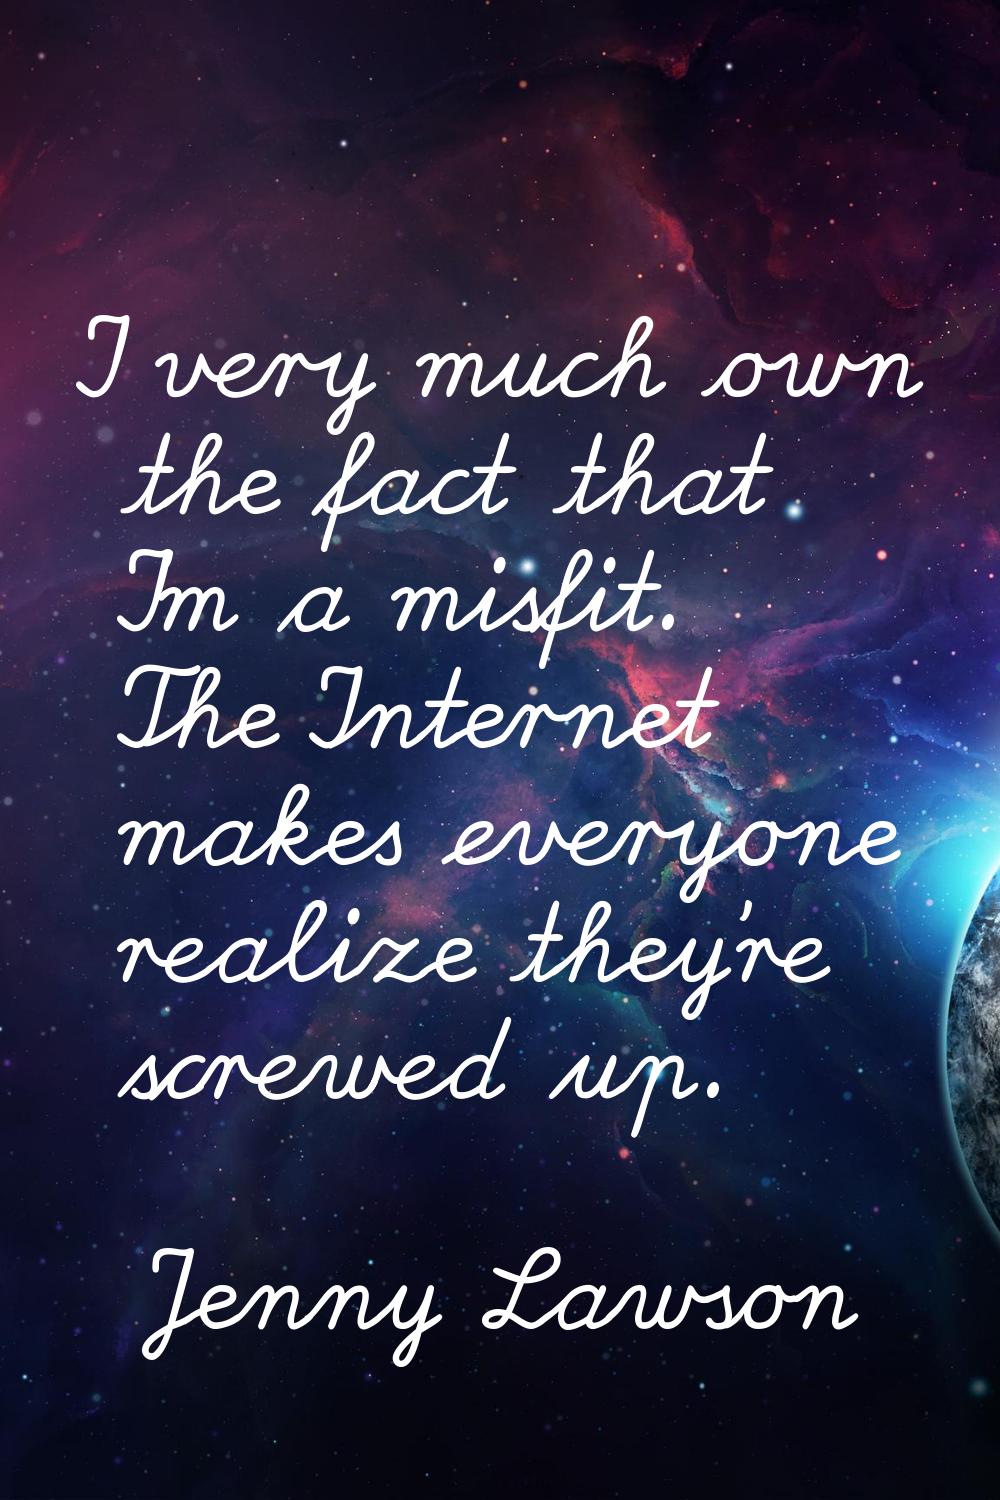 I very much own the fact that I'm a misfit. The Internet makes everyone realize they're screwed up.